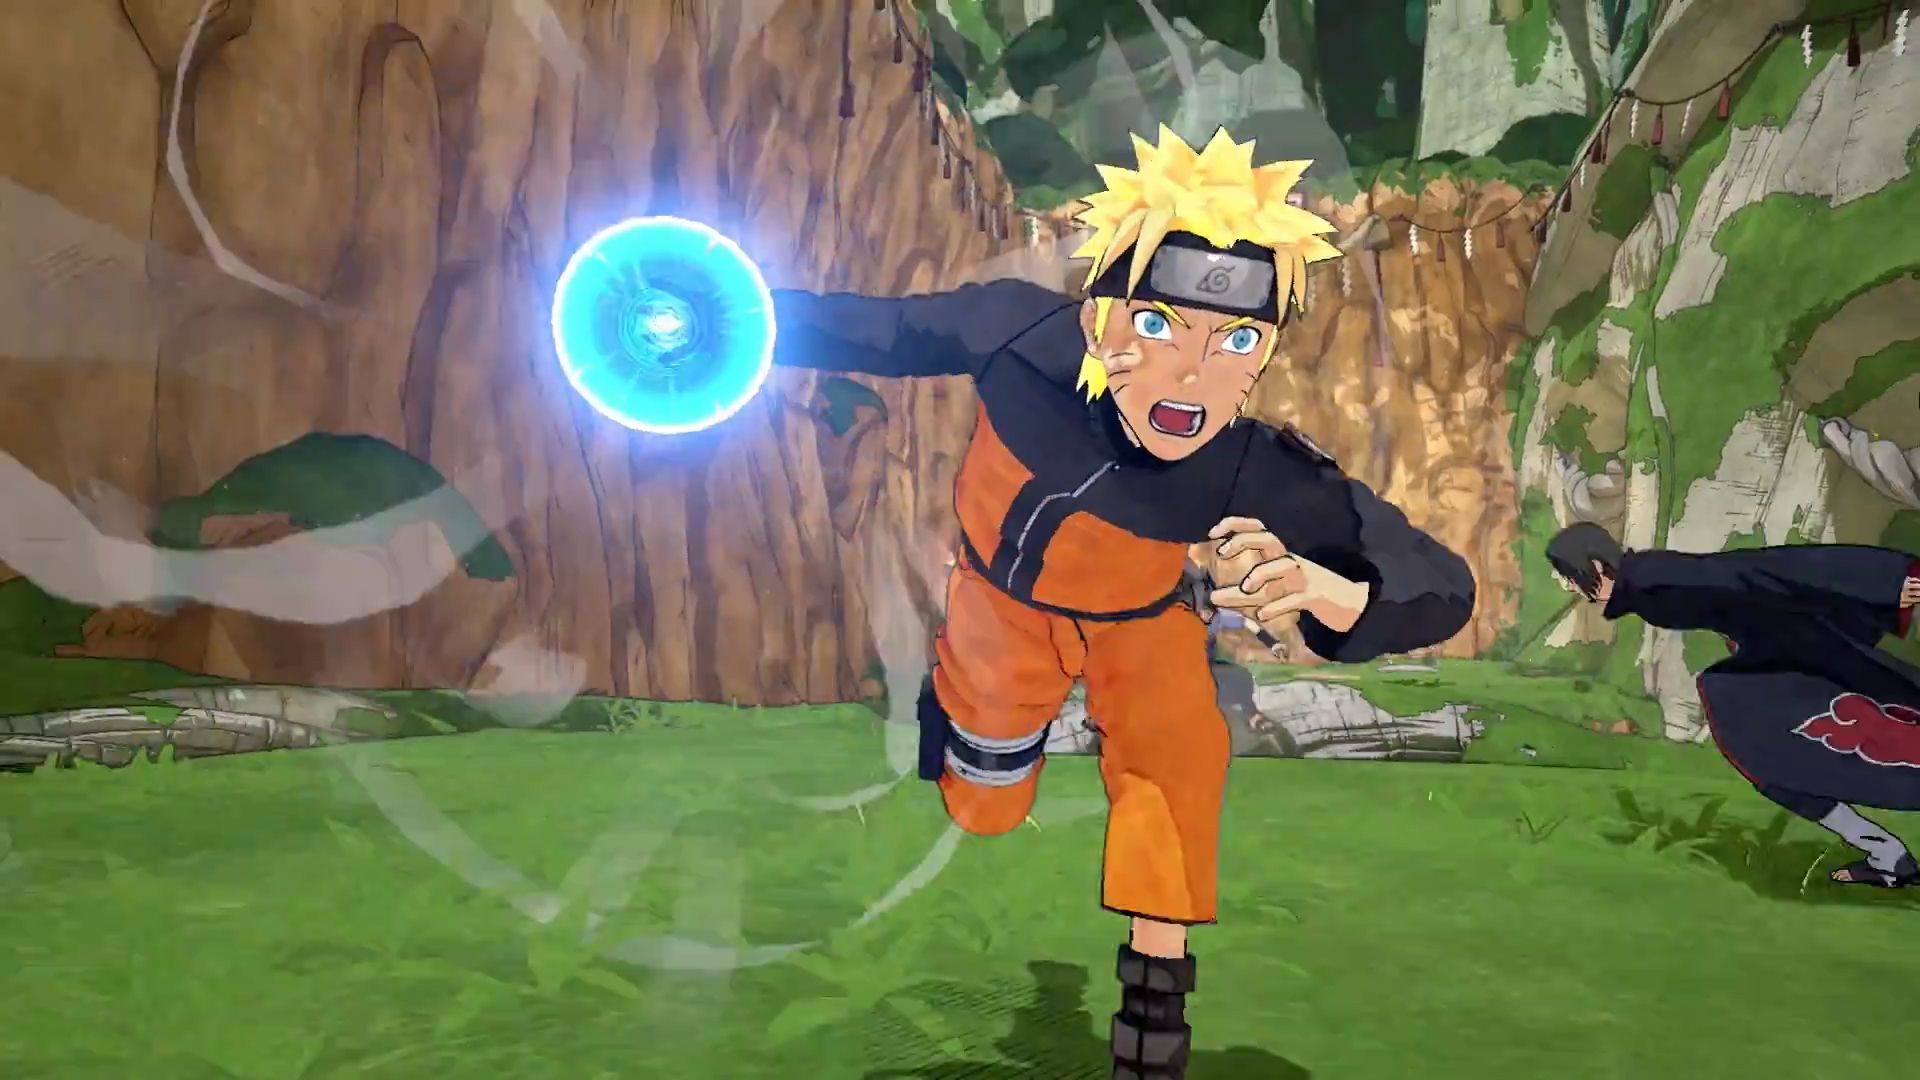 The New Naruto Game Is All About Class Based Online Ninja Team Battles